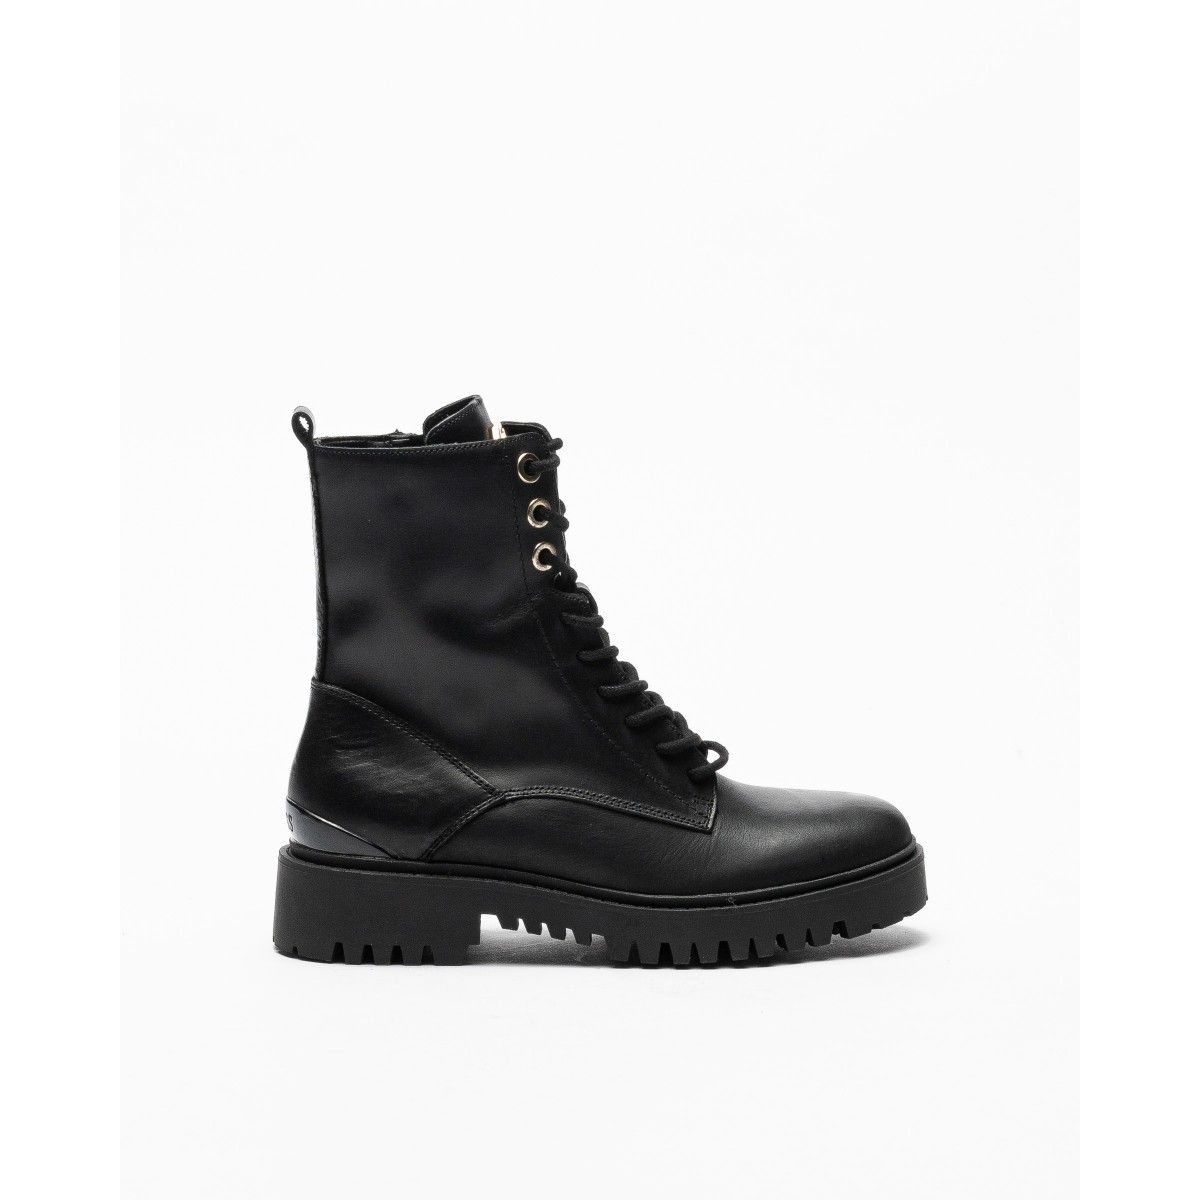 Guess Olone Black Combat boots - 14-FL7OLO-01 | PROF Online Store